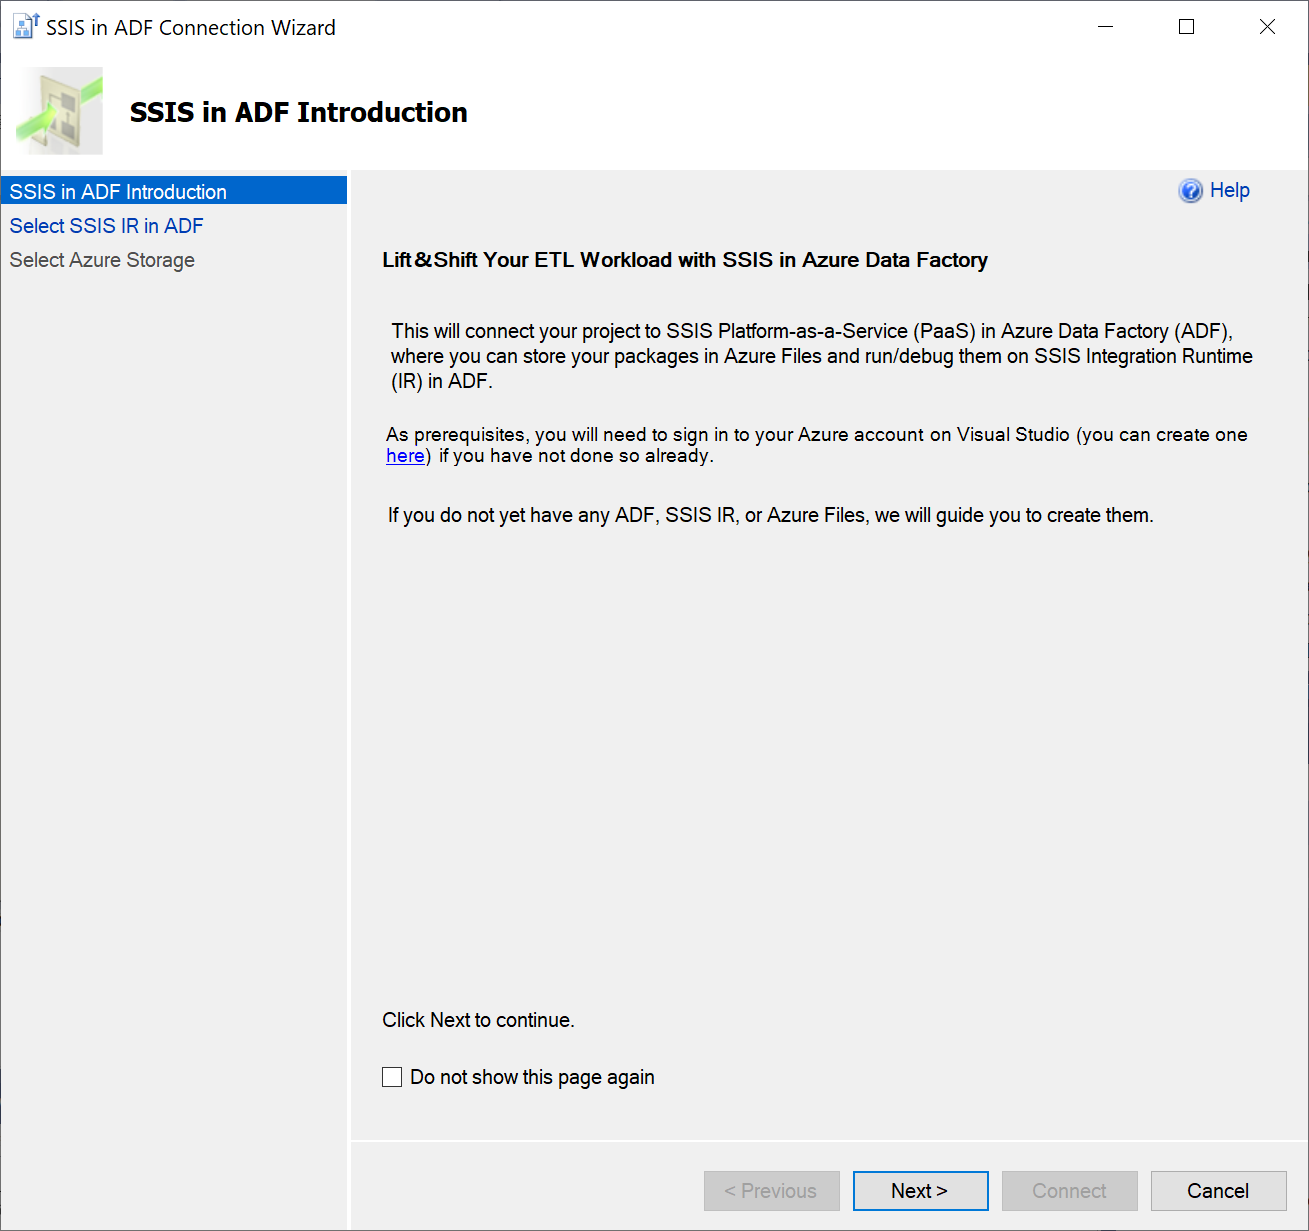 SSIS in ADF introduction